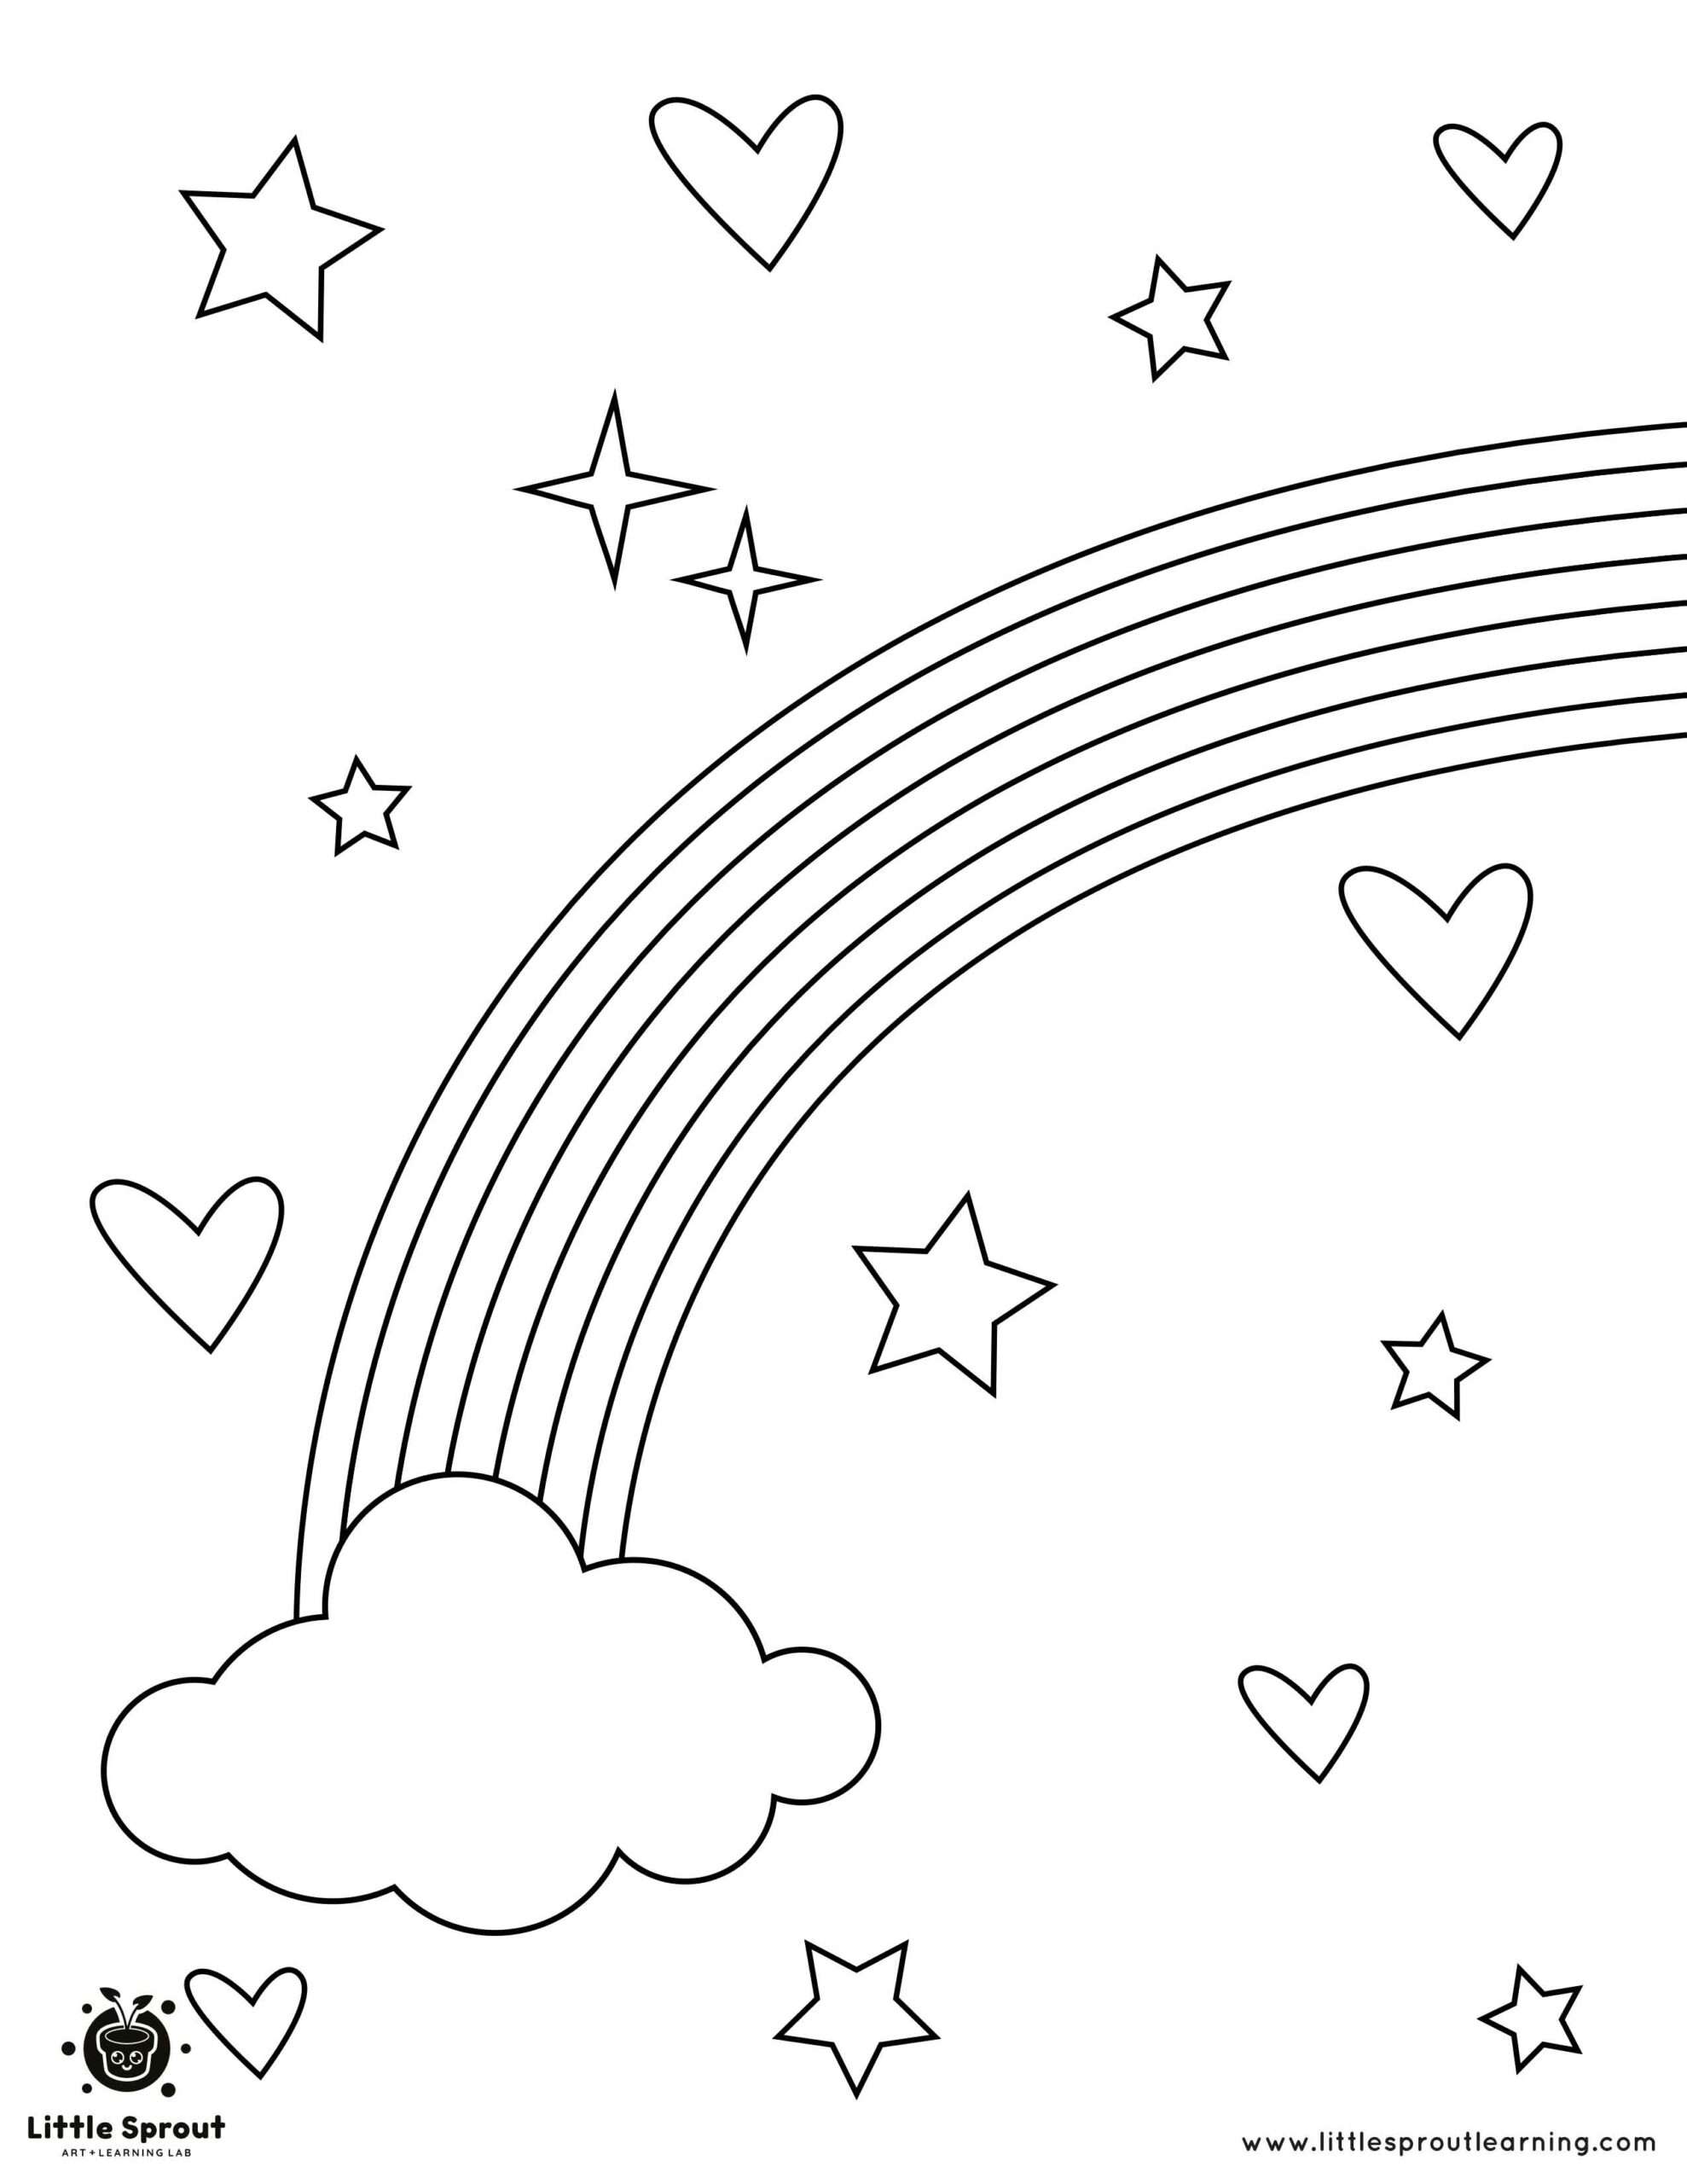 Coloring Page Rainbow 1 Little Sprout Learning scaled